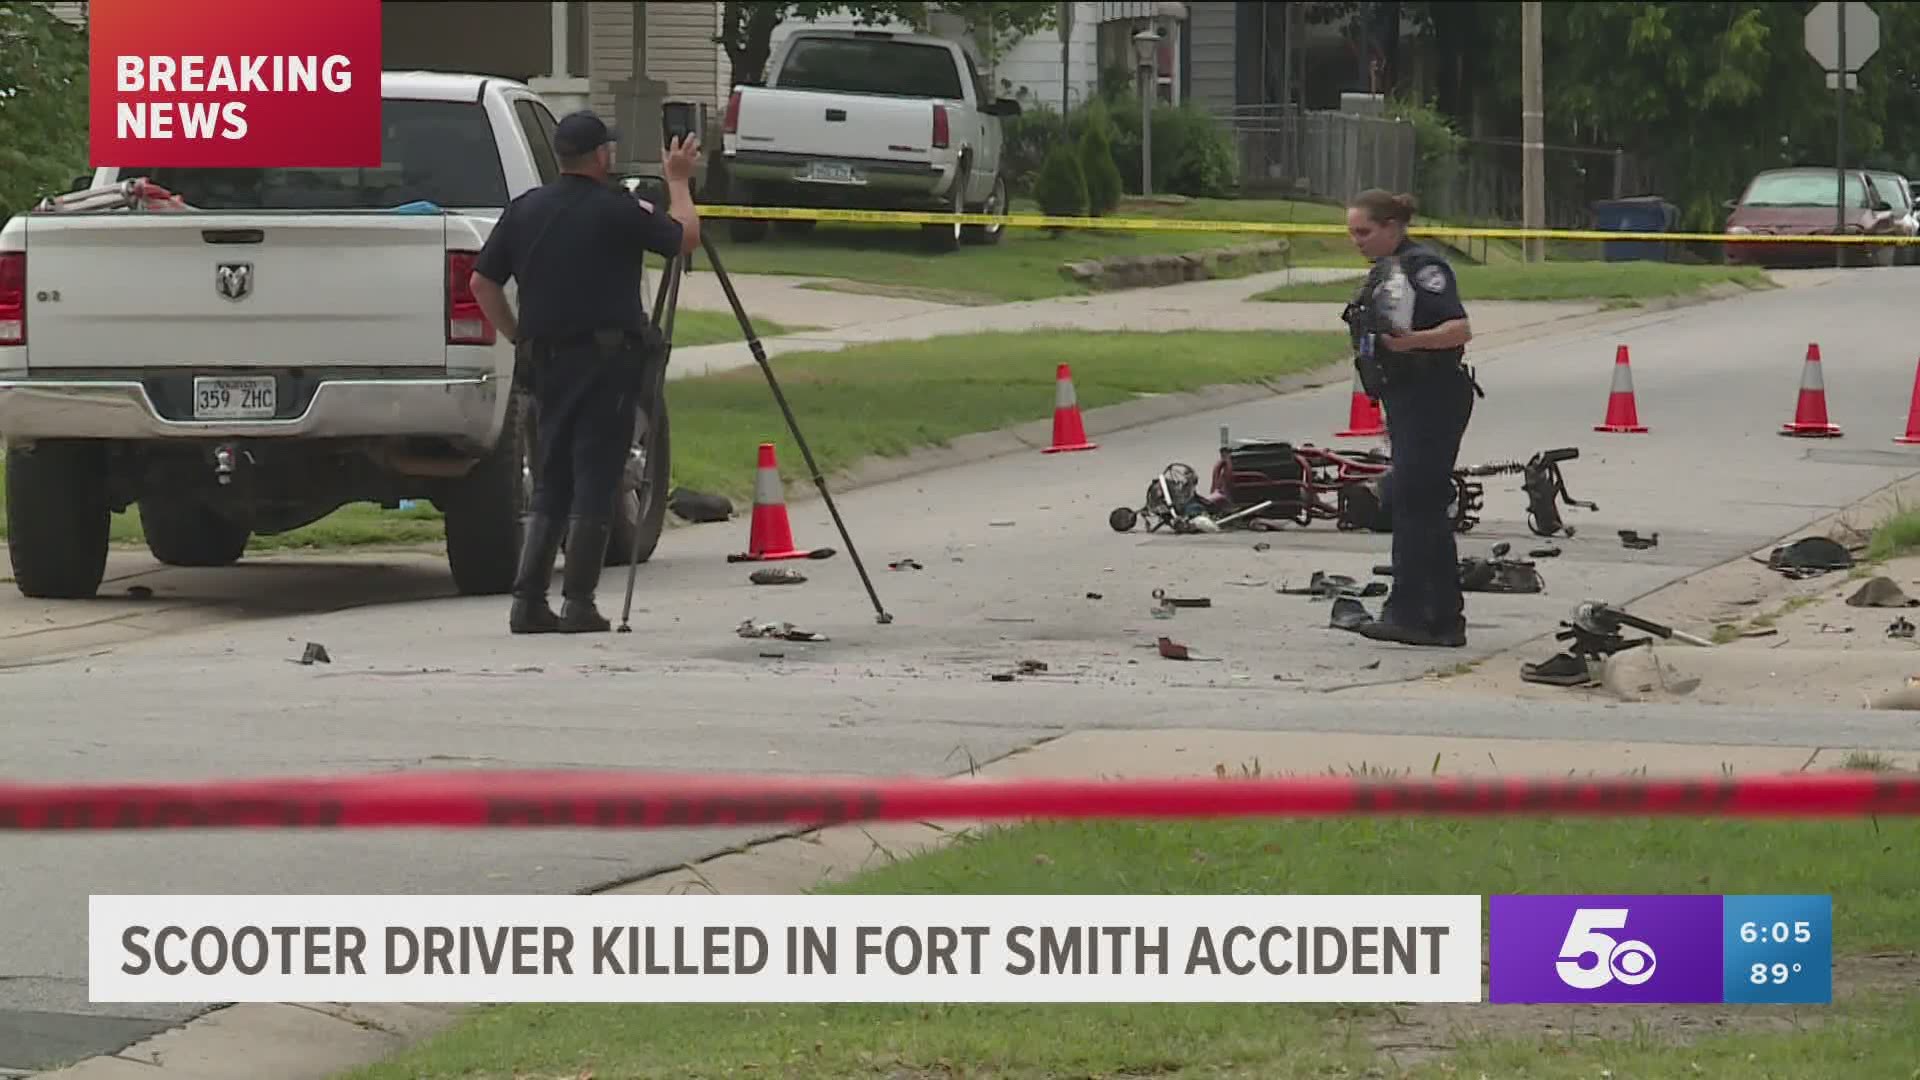 One person is dead following a crash involving a scooter and truck in Fort Smith.